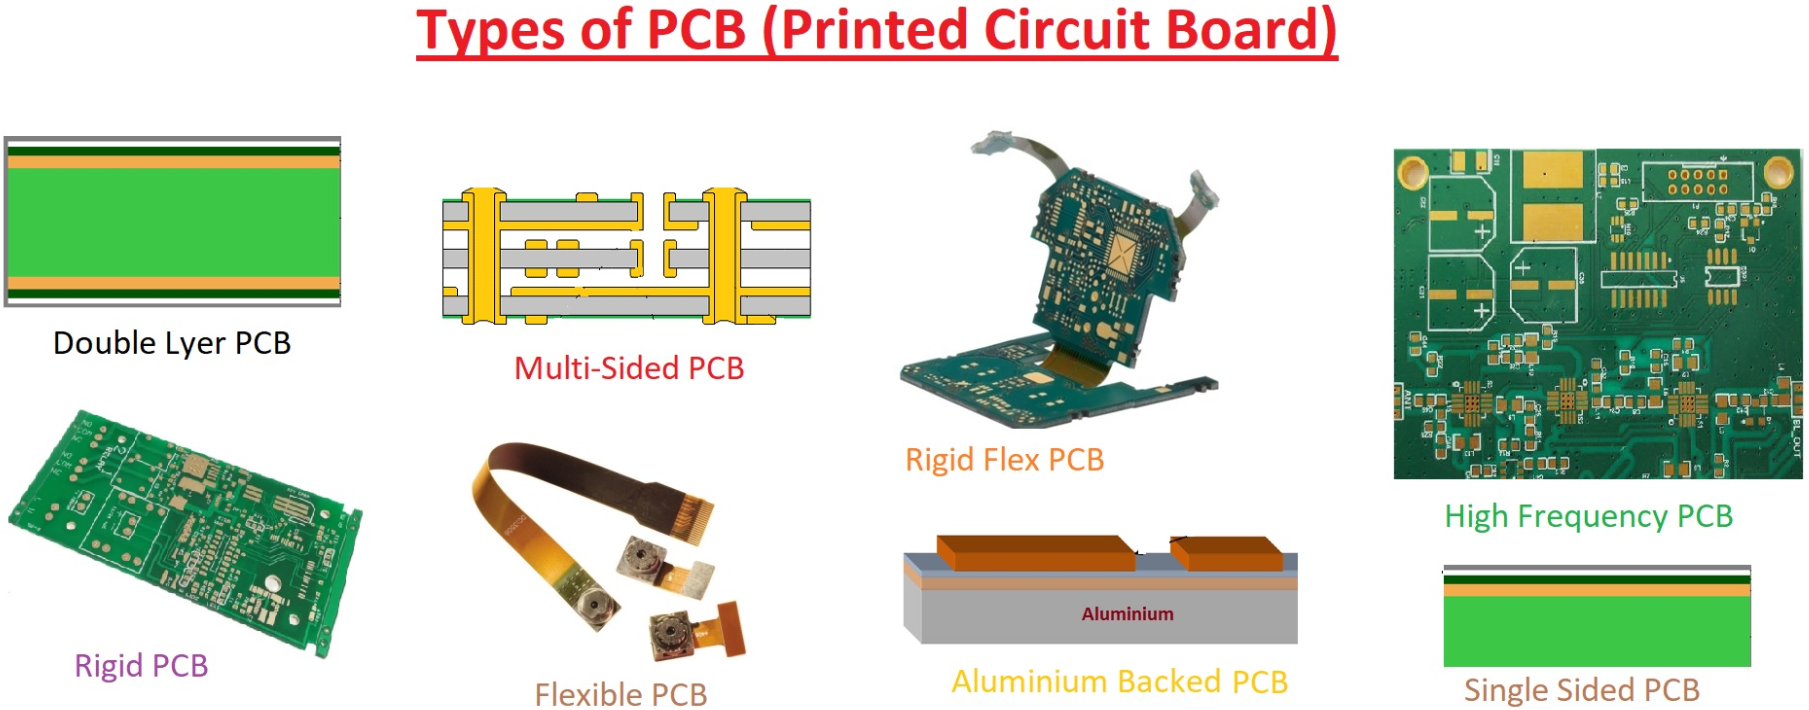 Types of Circuit Boards